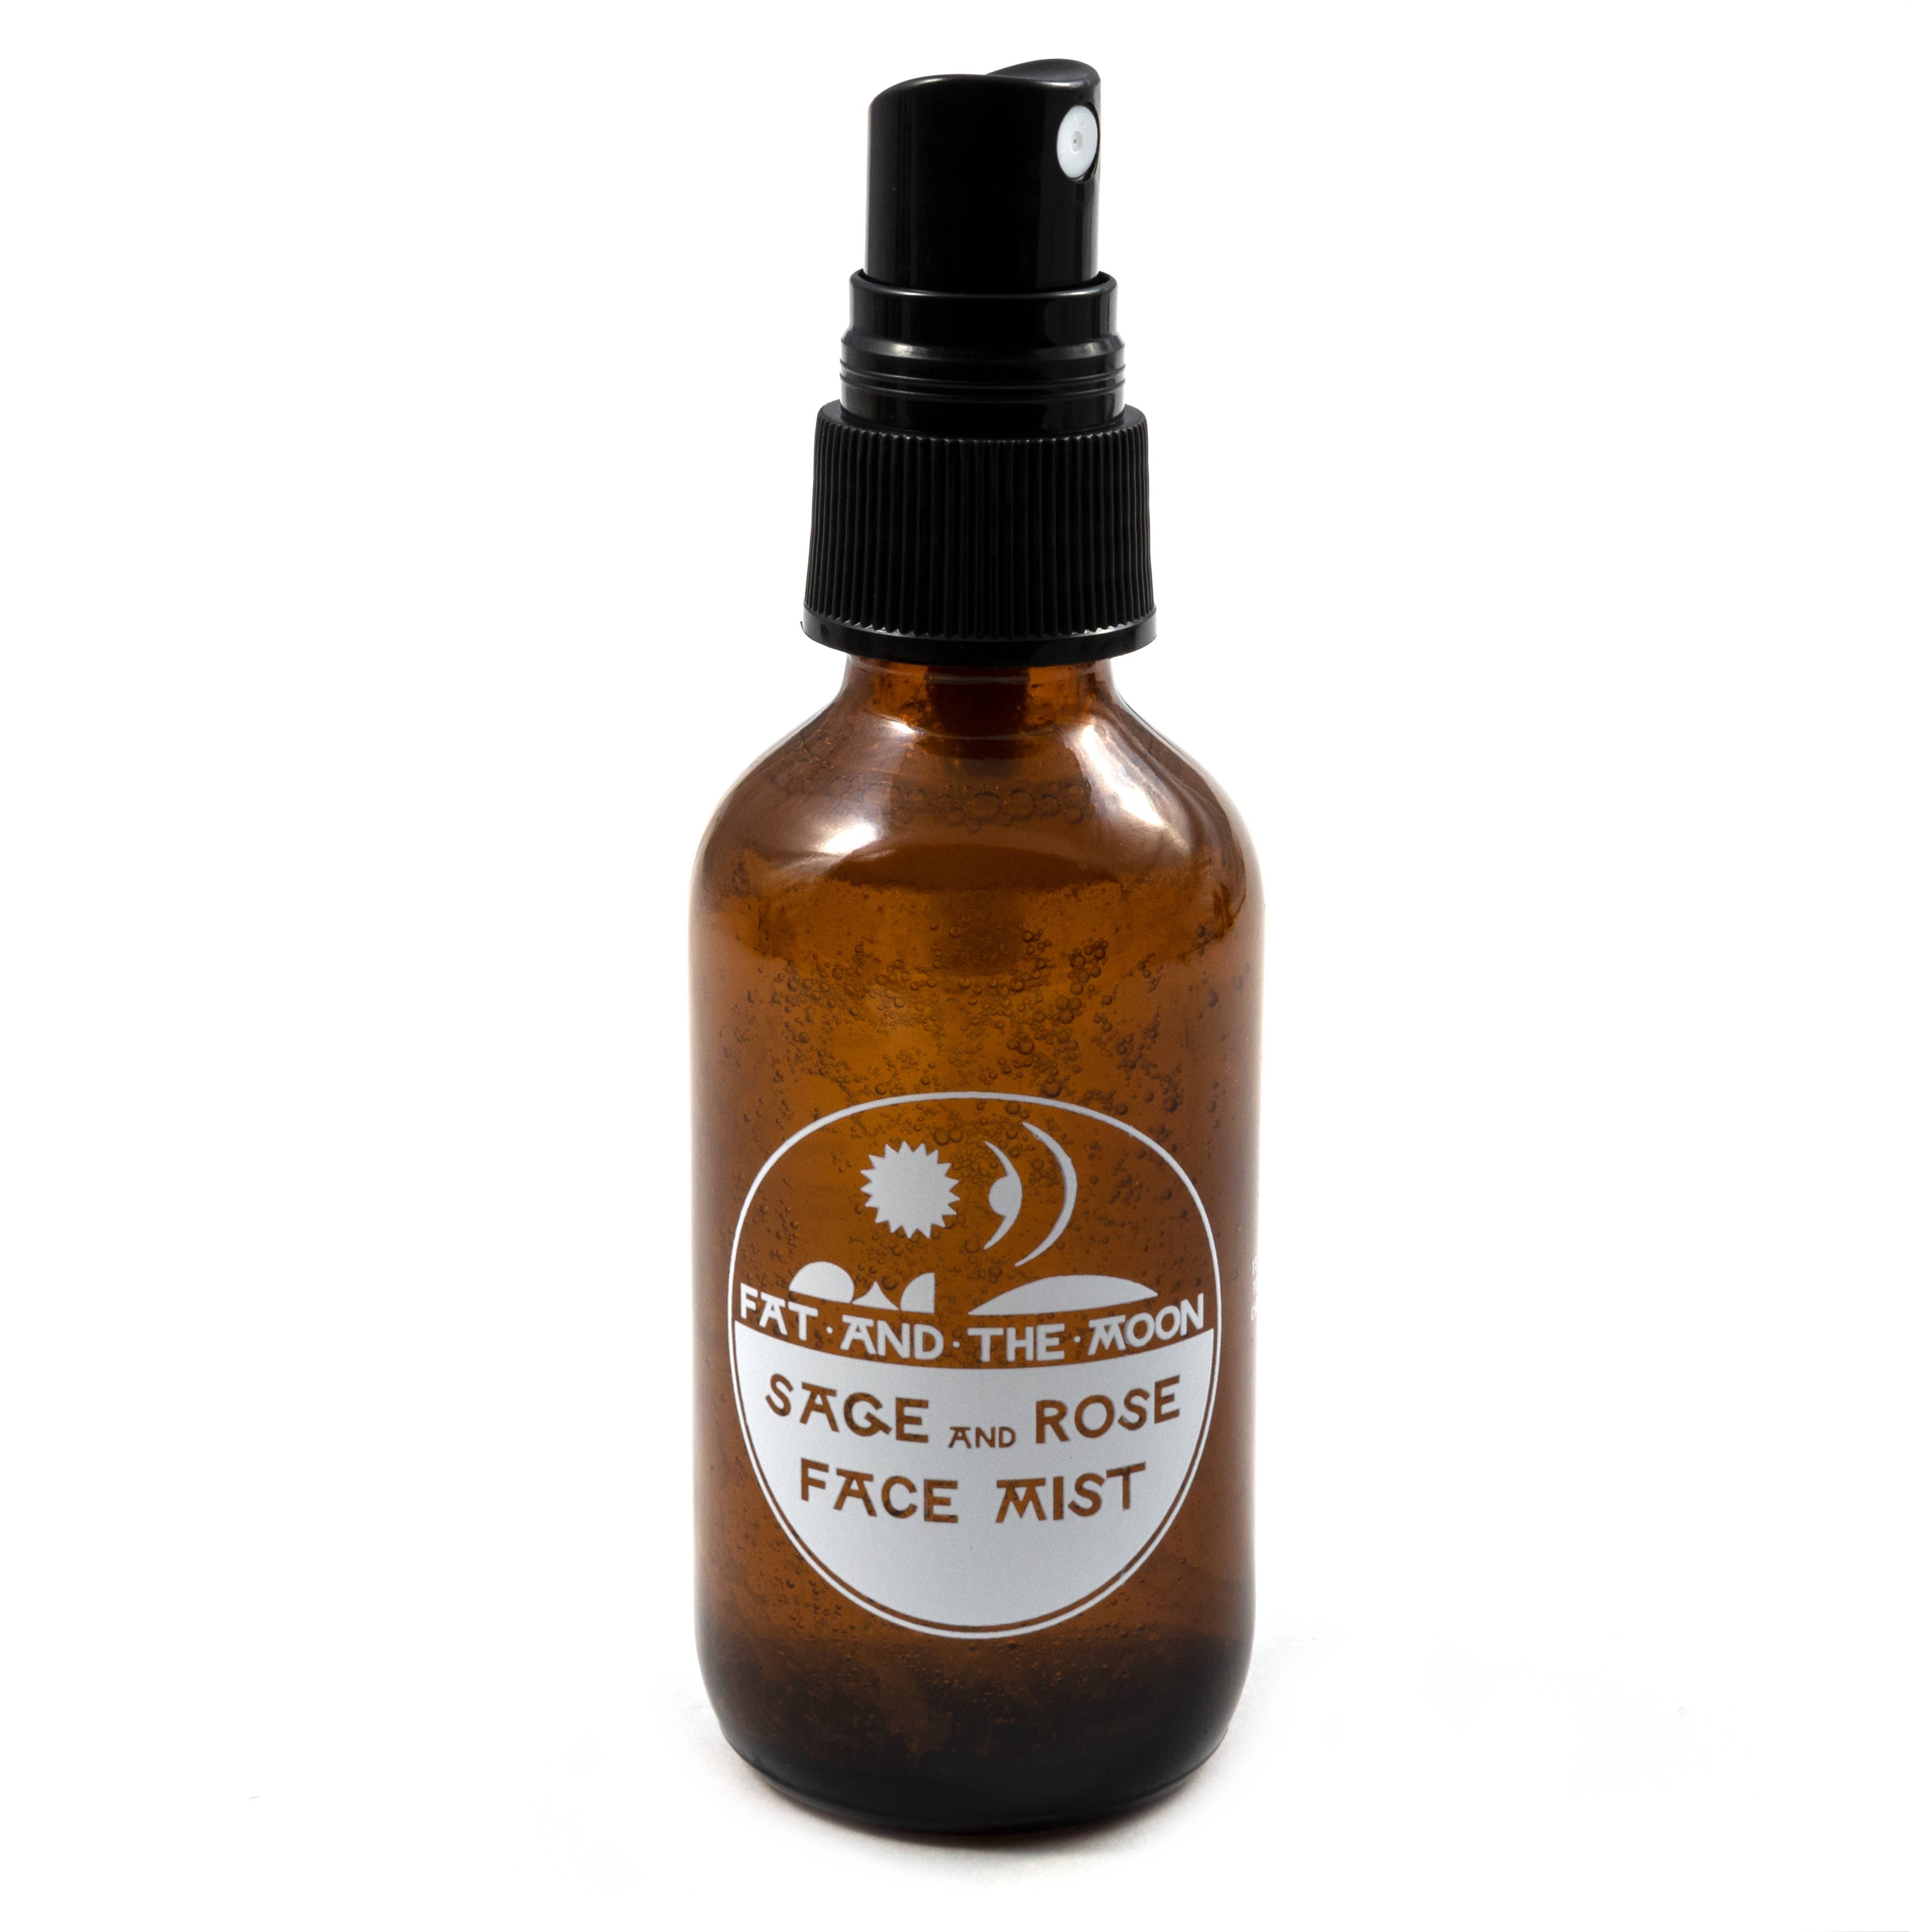 Fat and the Moon - Sage and Rose Face Mist